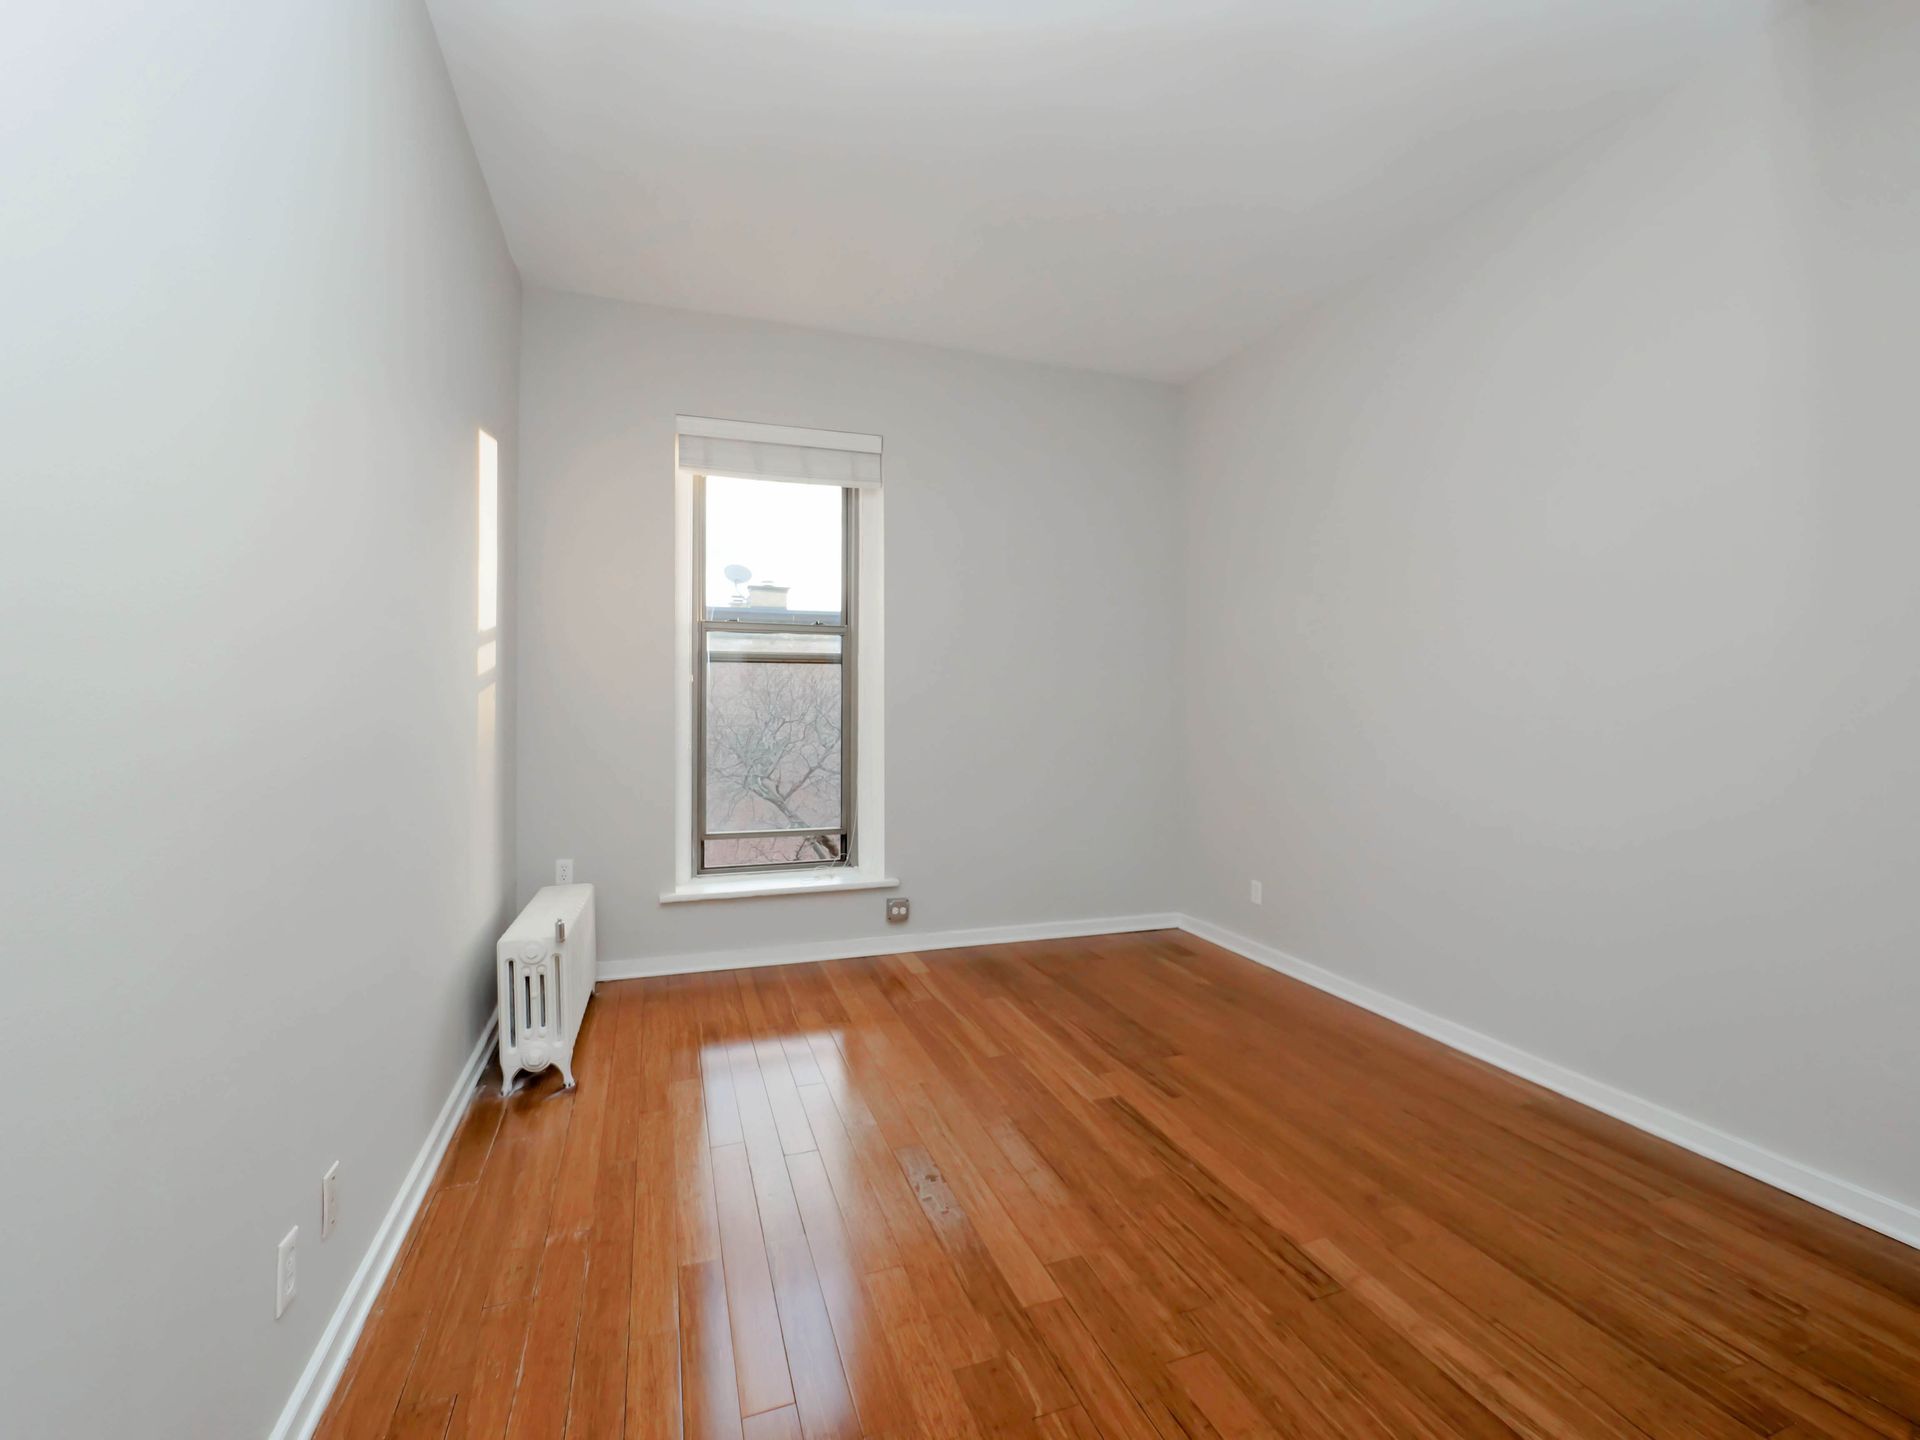 An empty room with hardwood floors and a window at Reside on Clark.